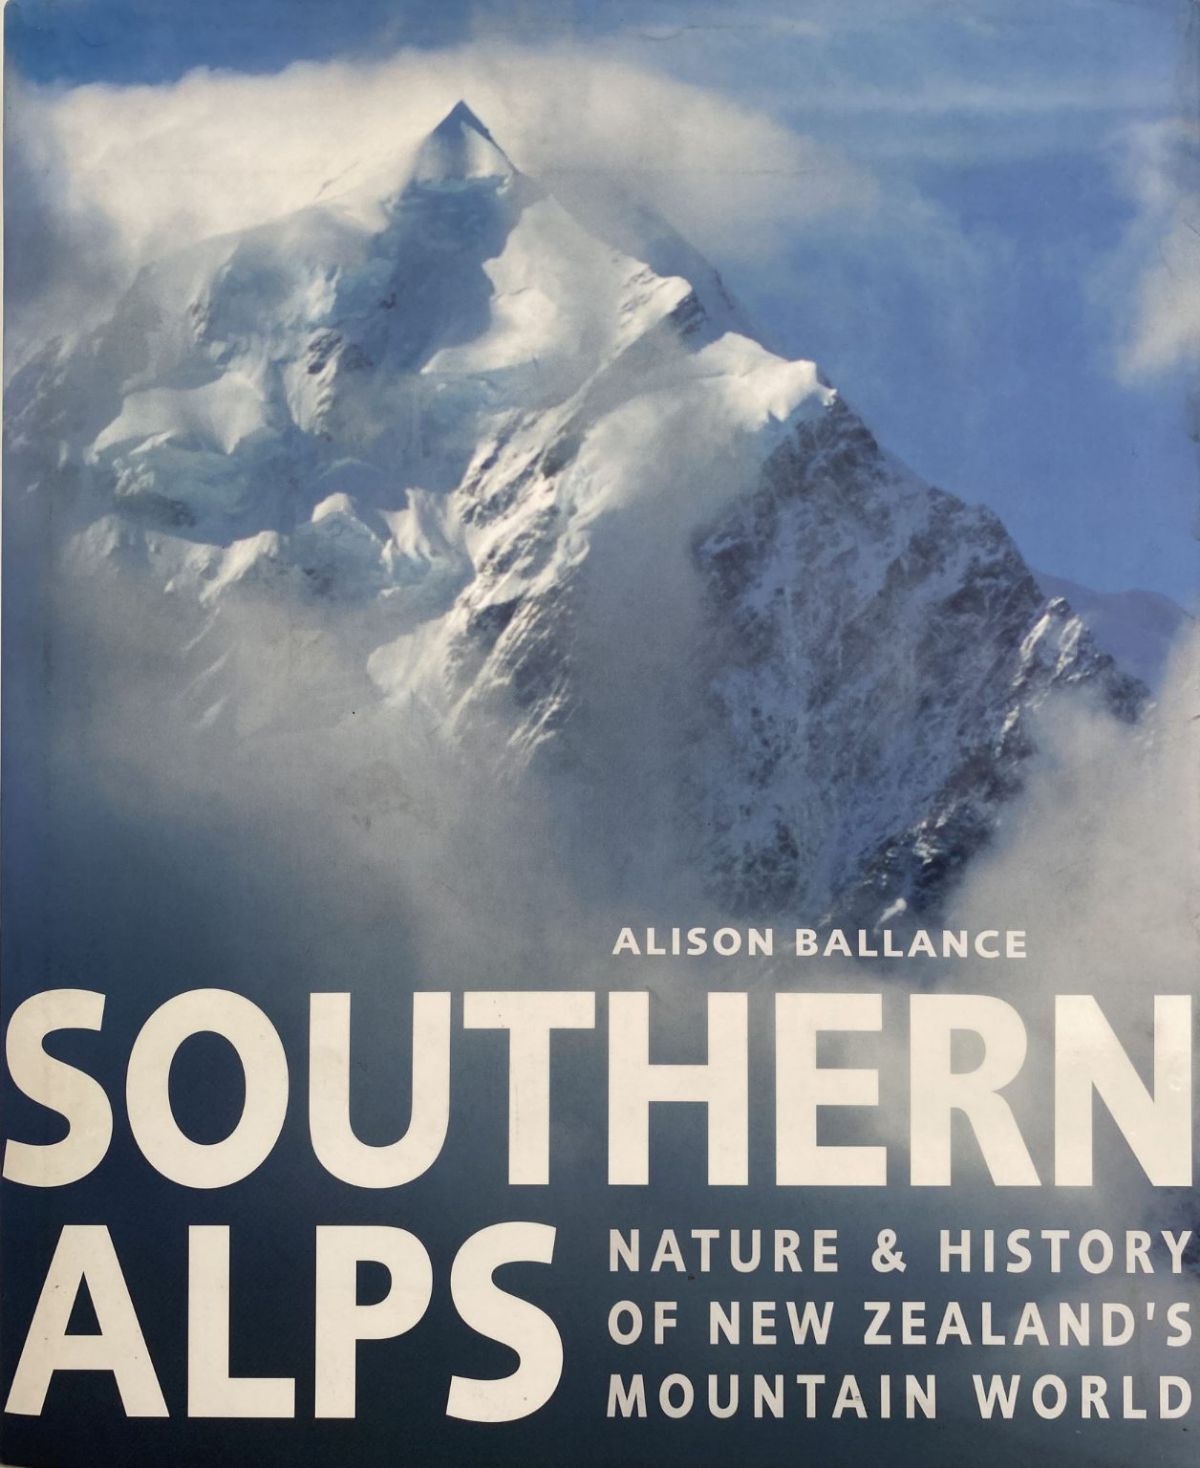 SOUTHERN ALPS: Nature & History of New Zealand's Mountain World